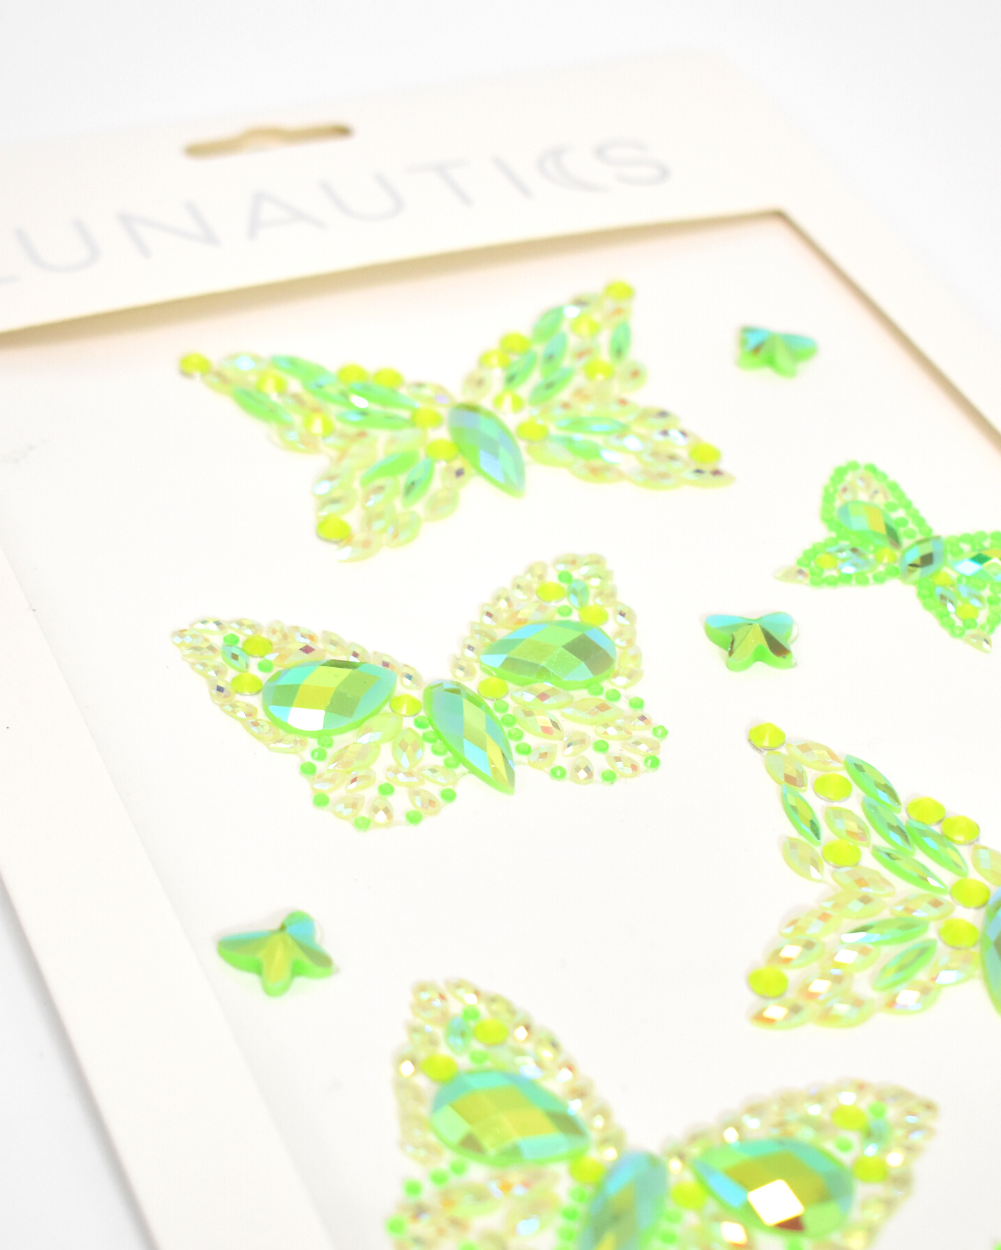 Neon Nymph Butterfly Jewel Mix Pack - Lunautics